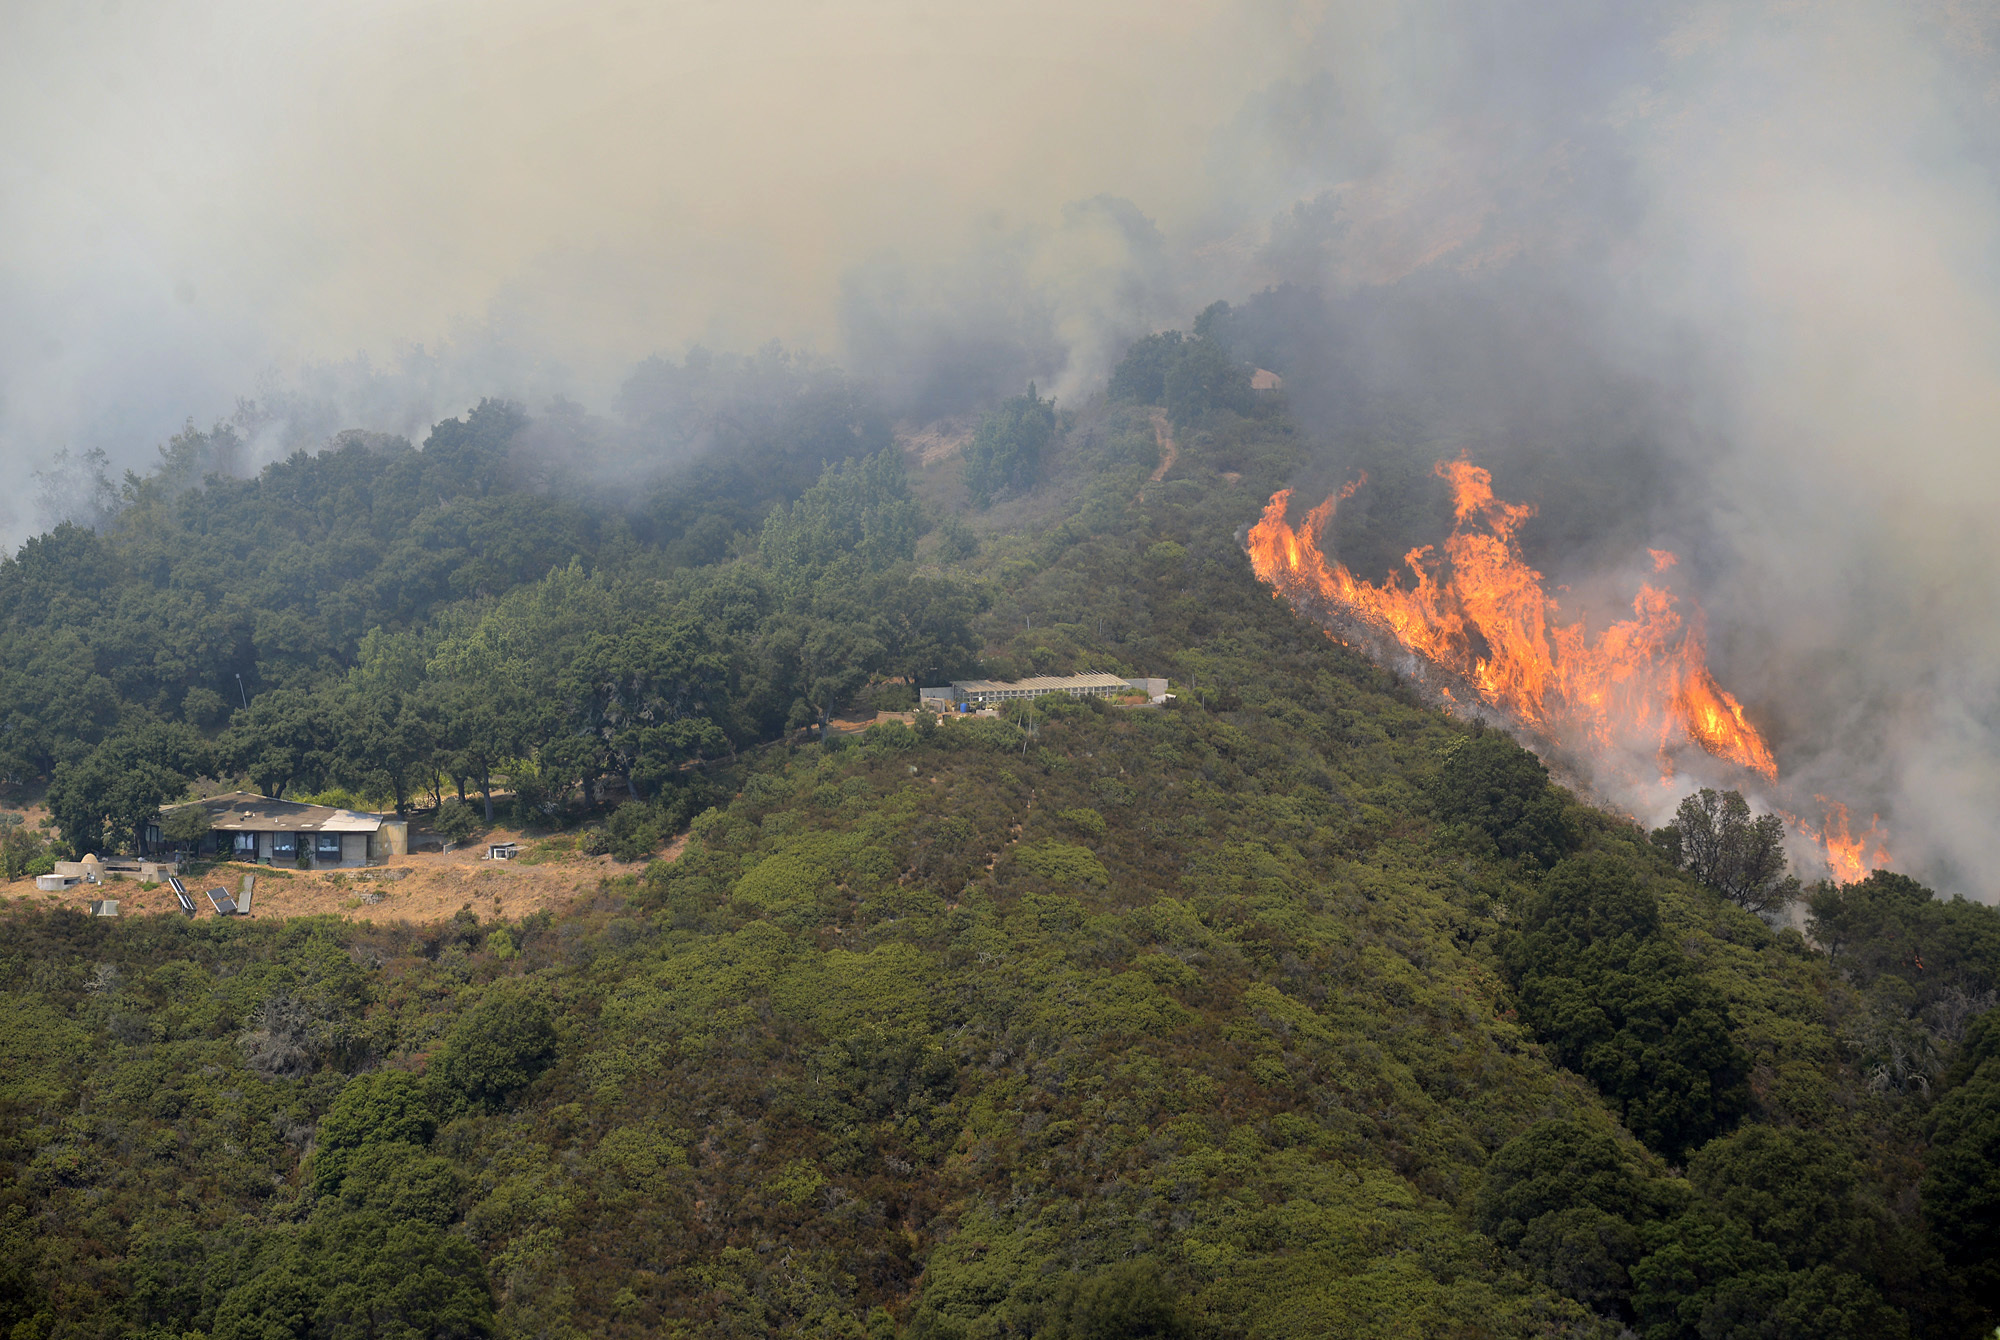 A wildfire burns in the Palo Colorado Canyon in the scenic Big Sur region of California's Central Coast, Monday, July 25, 2016. Fire crews have made some gains against a massive wildfire burning in rugged terrain near the scenic Big Sur region.